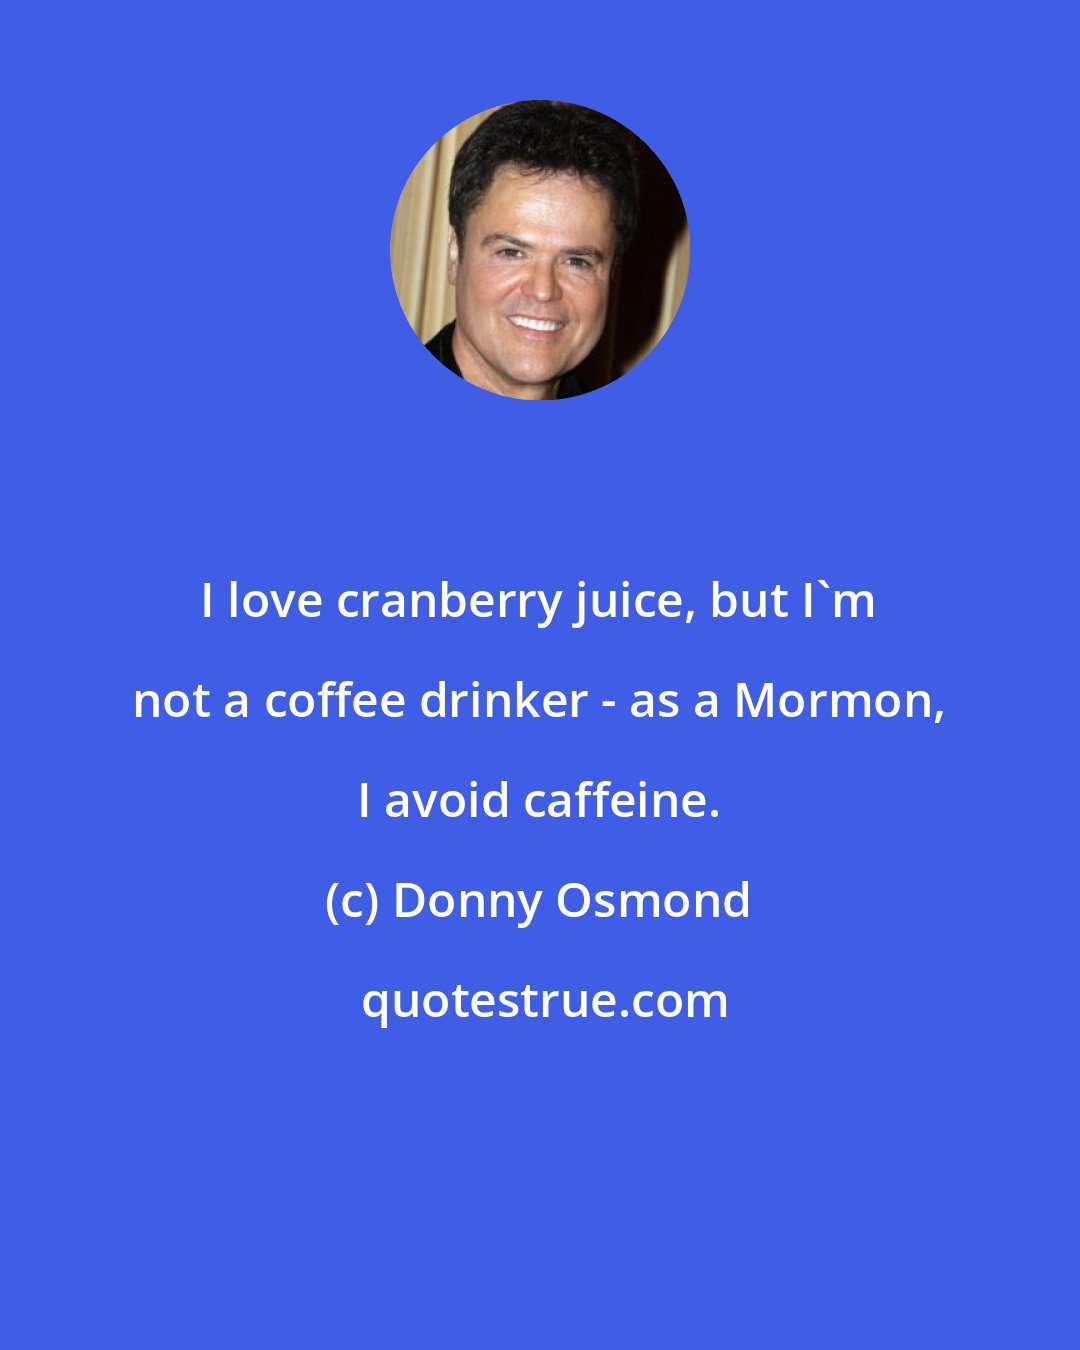 Donny Osmond: I love cranberry juice, but I'm not a coffee drinker - as a Mormon, I avoid caffeine.